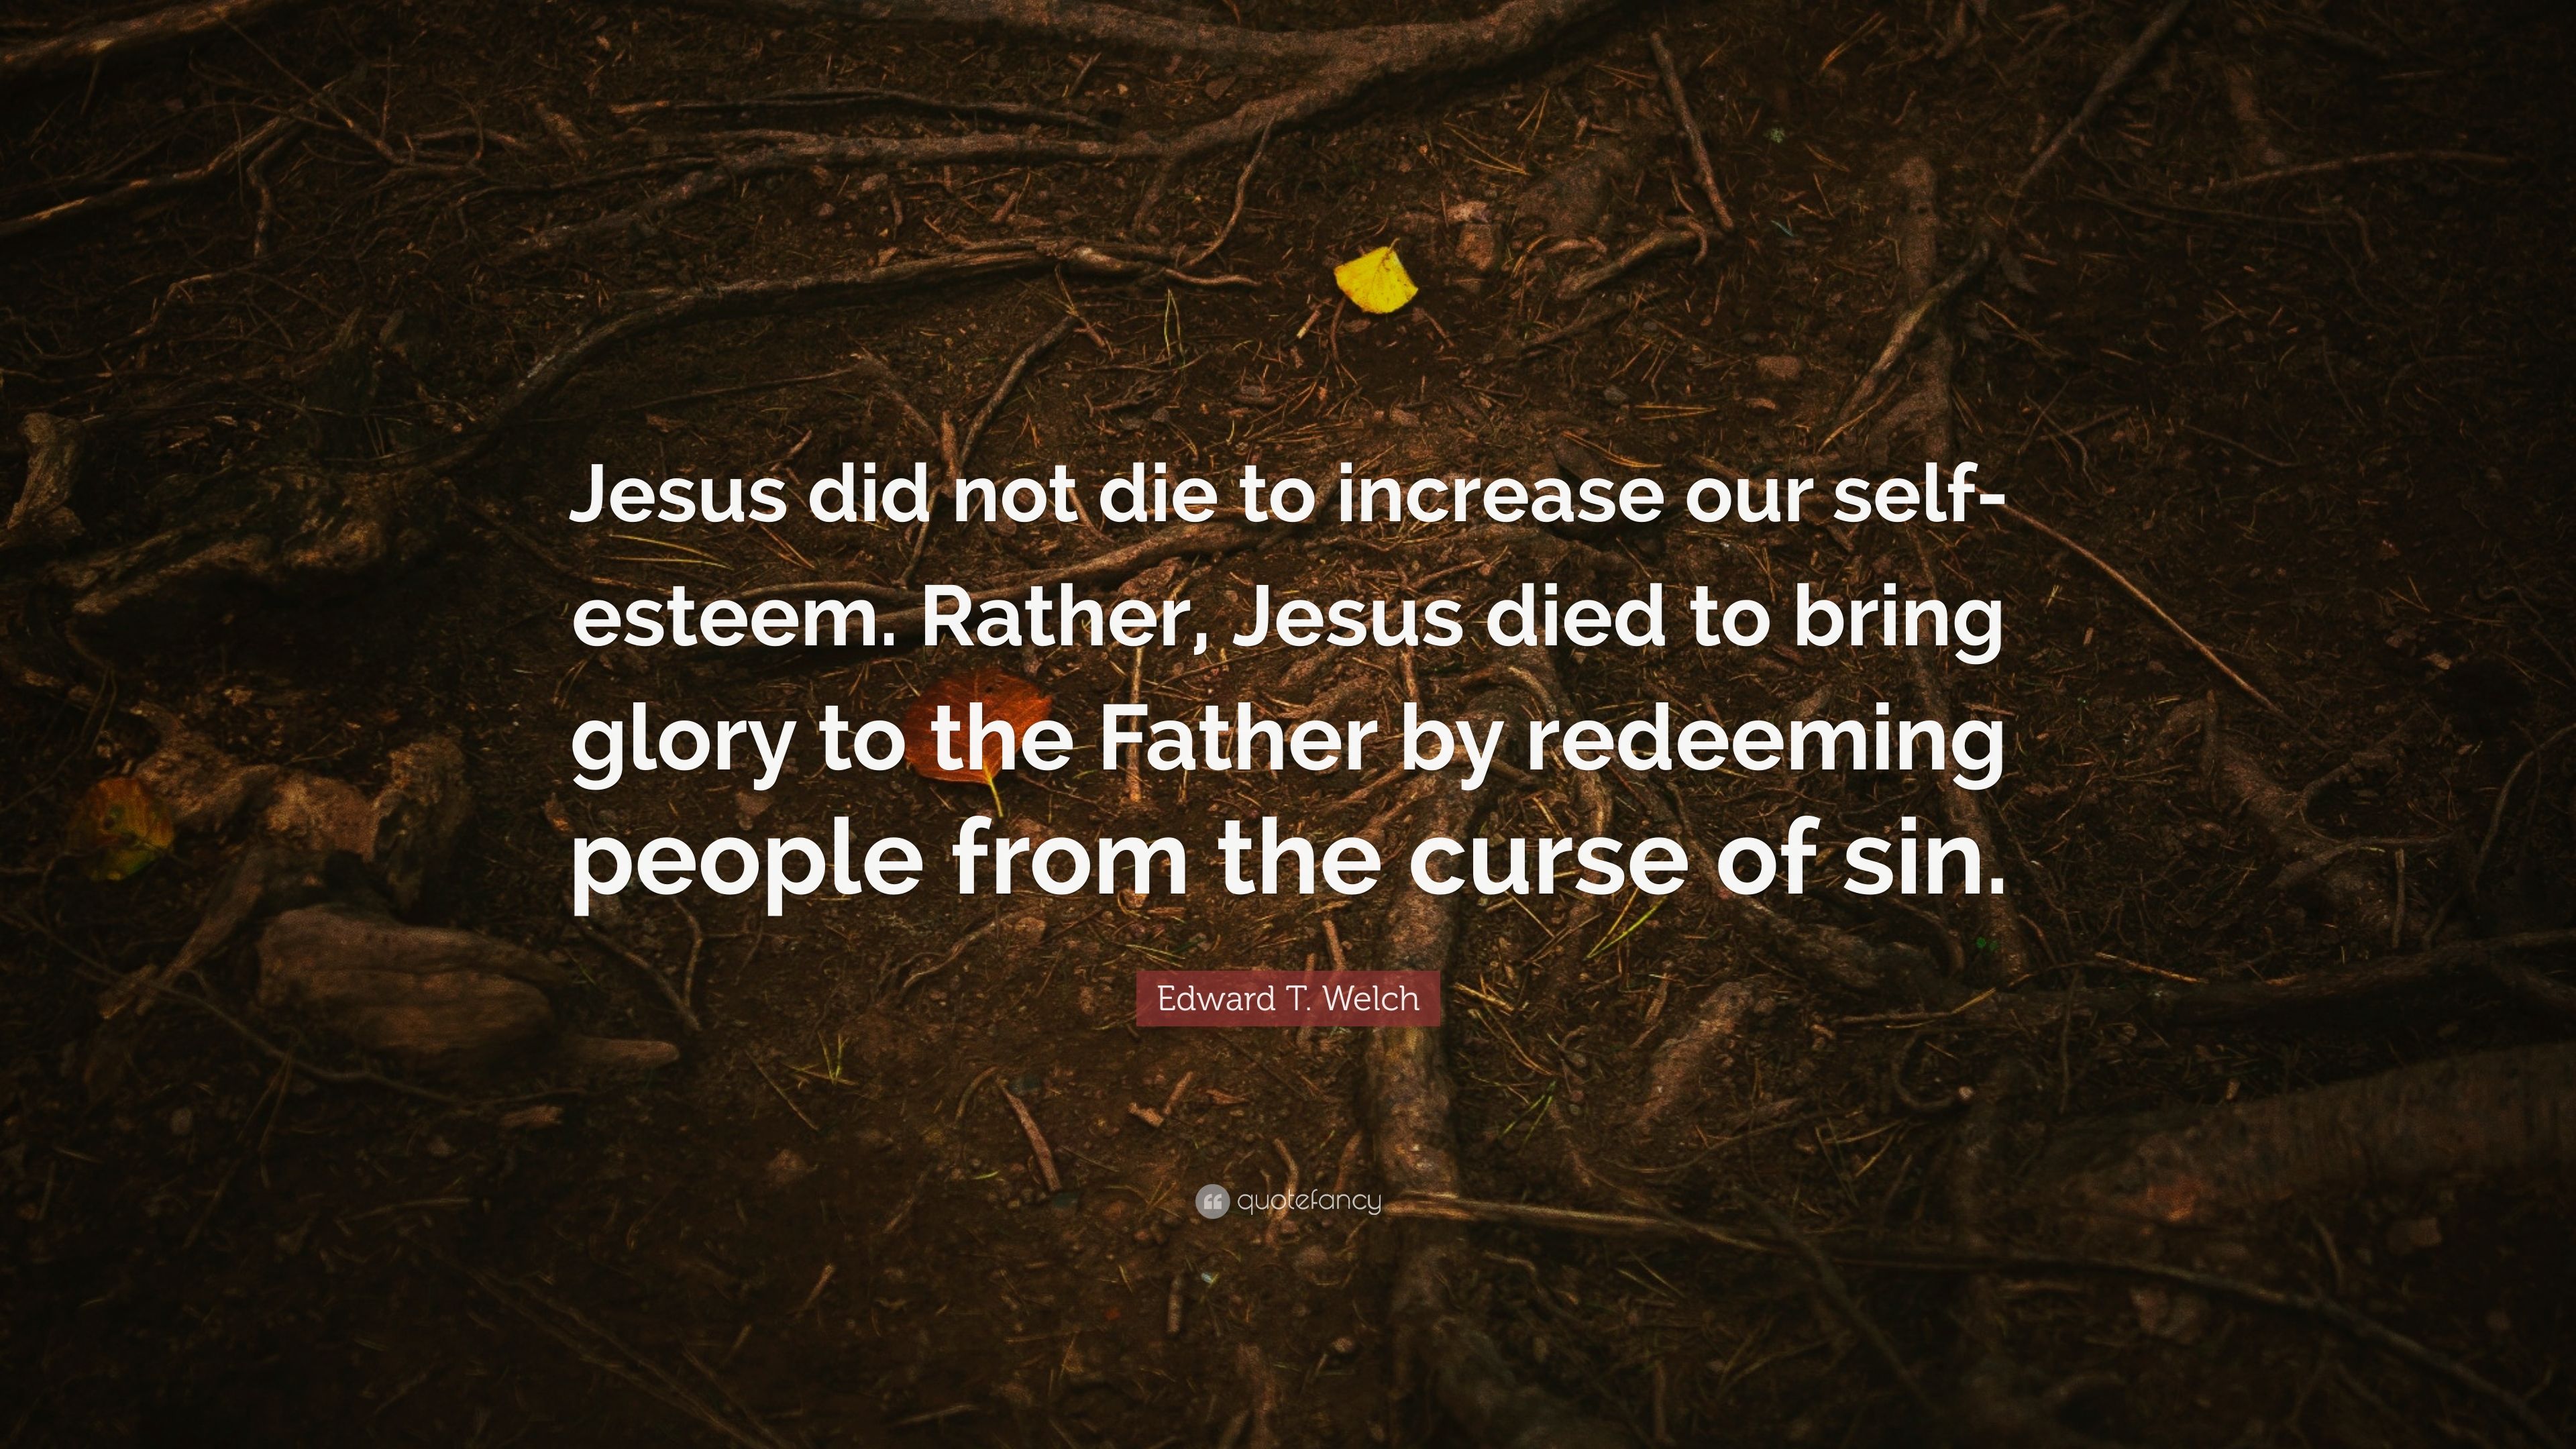 Edward T. Welch Quote: “Jesus did not die to increase our self